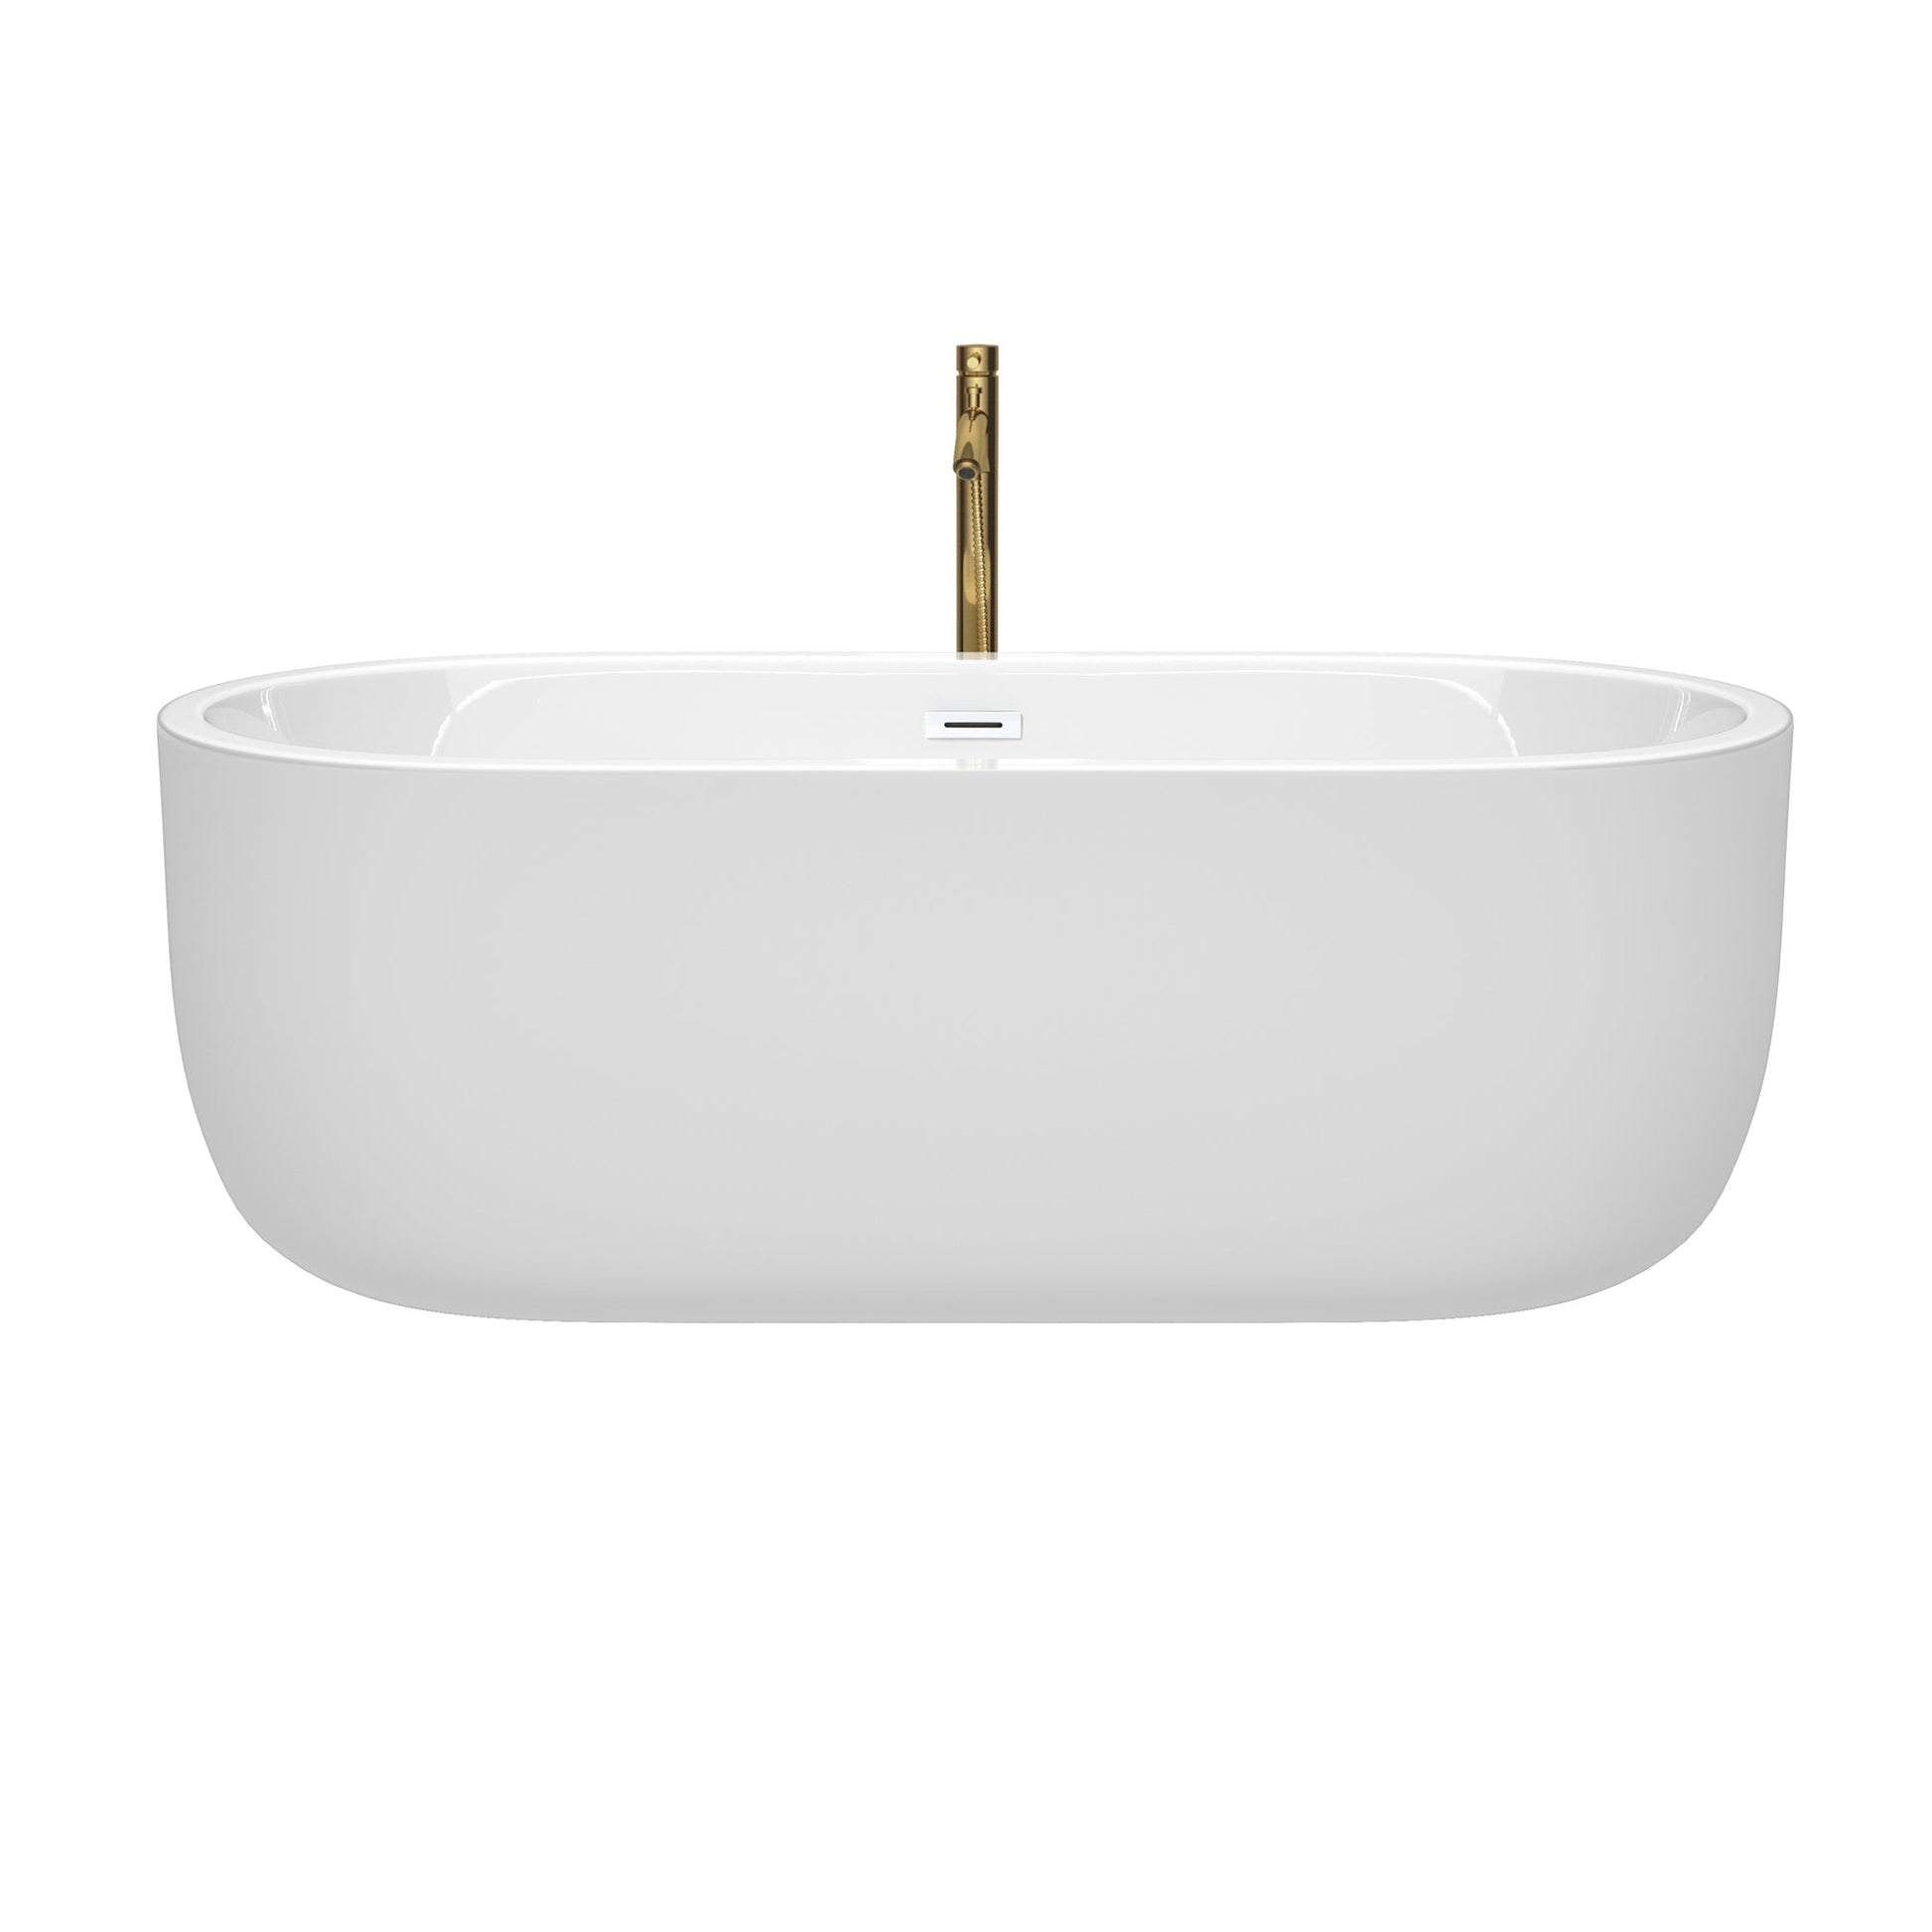 Wyndham Collection Juliette 67" Freestanding Bathtub in White With Shiny White Trim and Floor Mounted Faucet in Brushed Gold